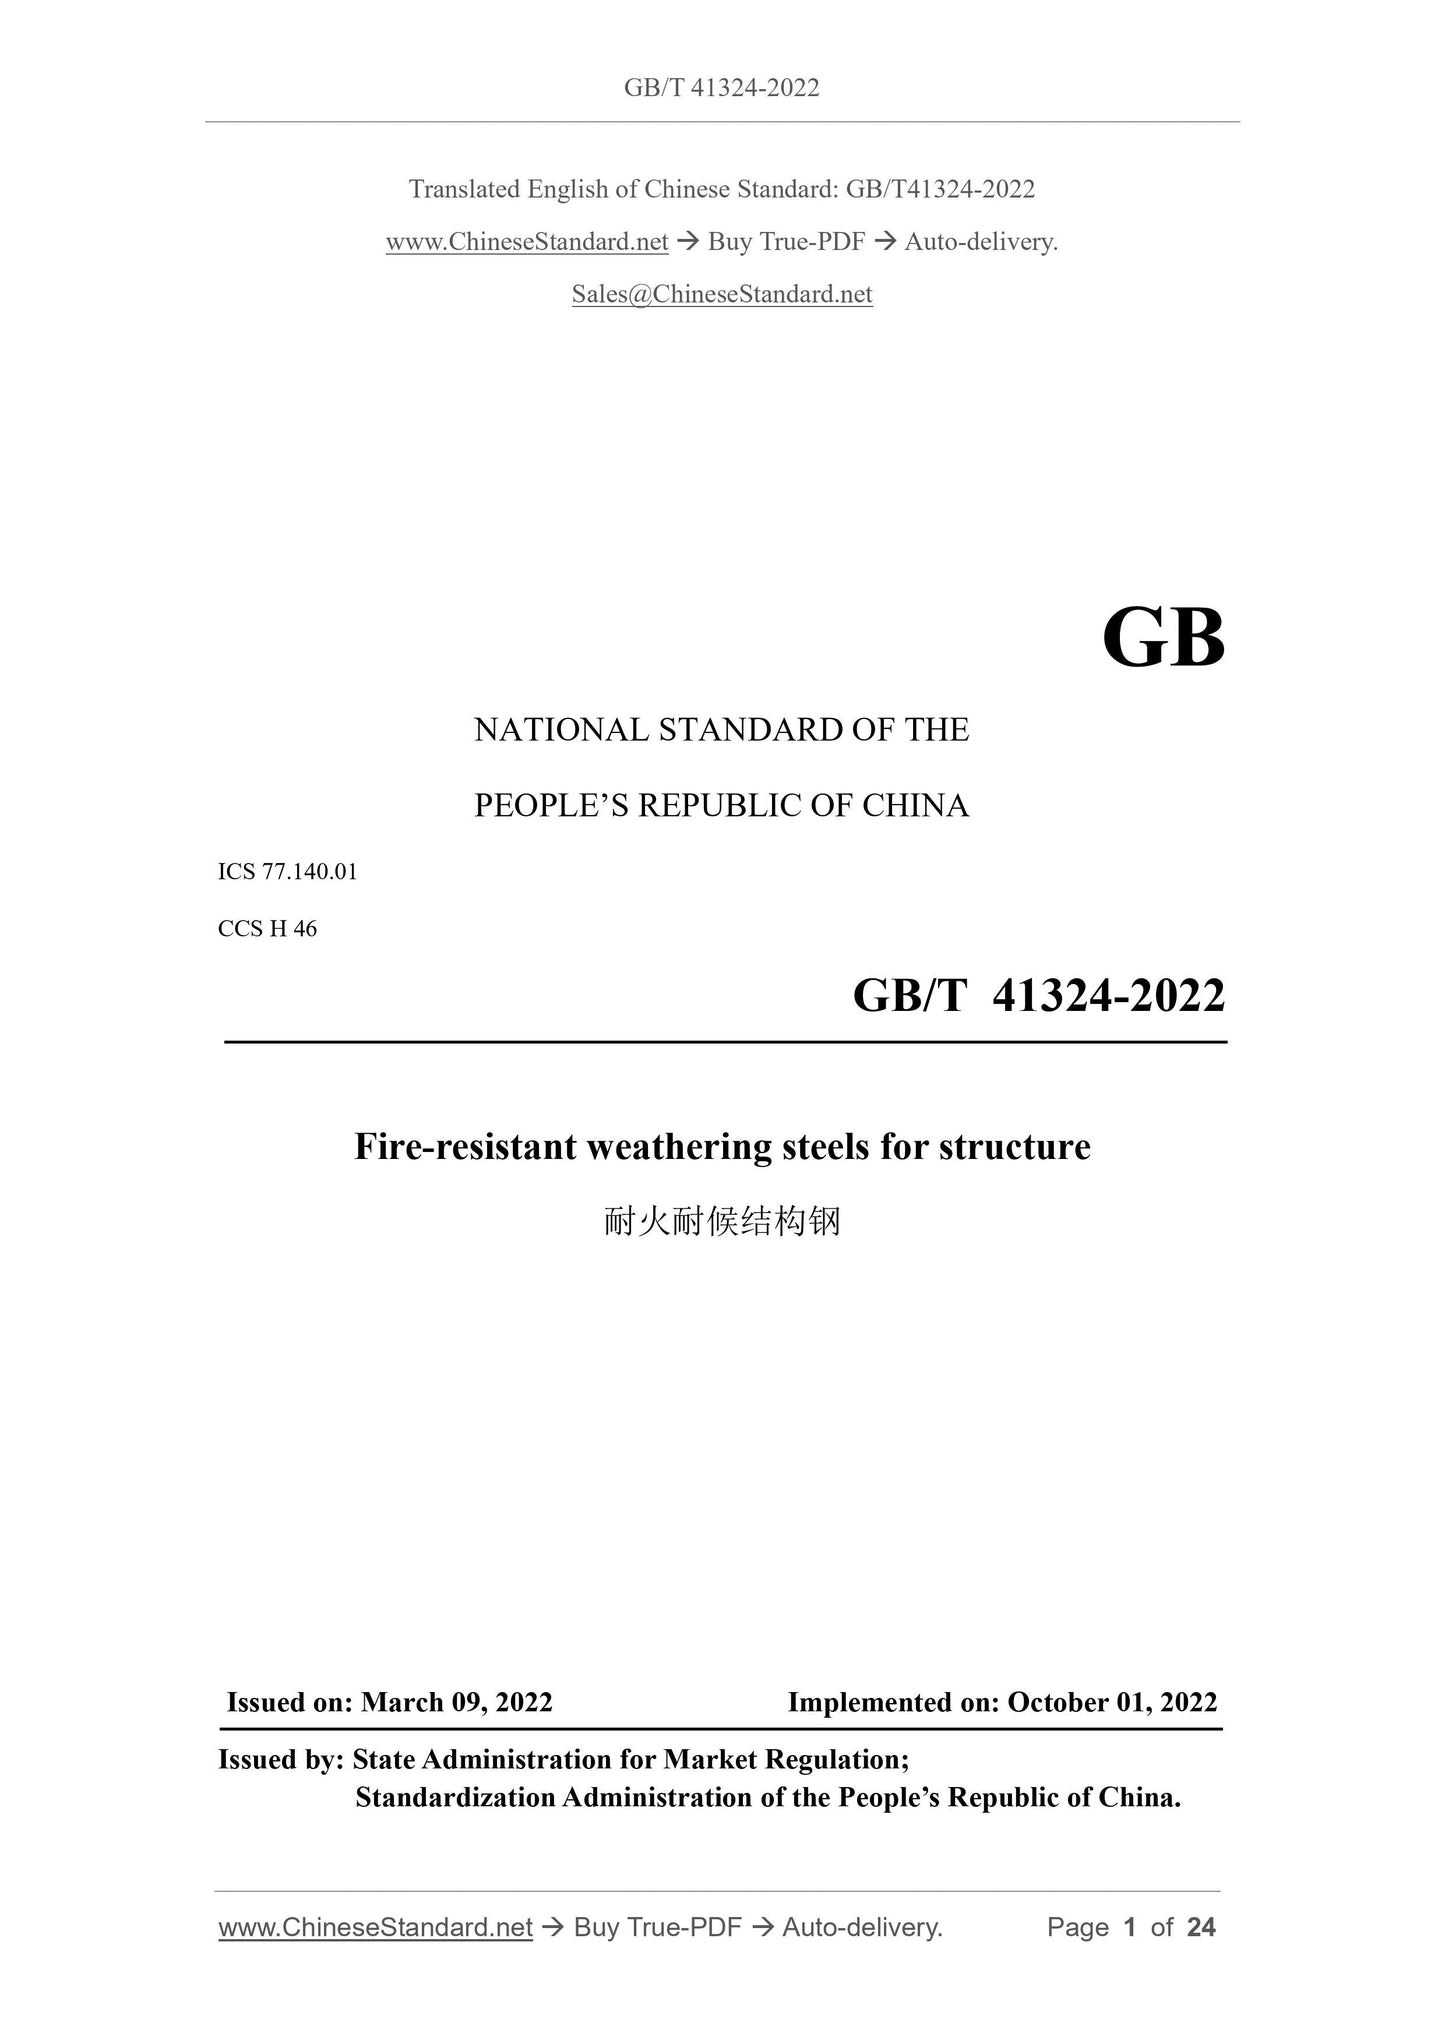 GB/T 41324-2022 Page 1